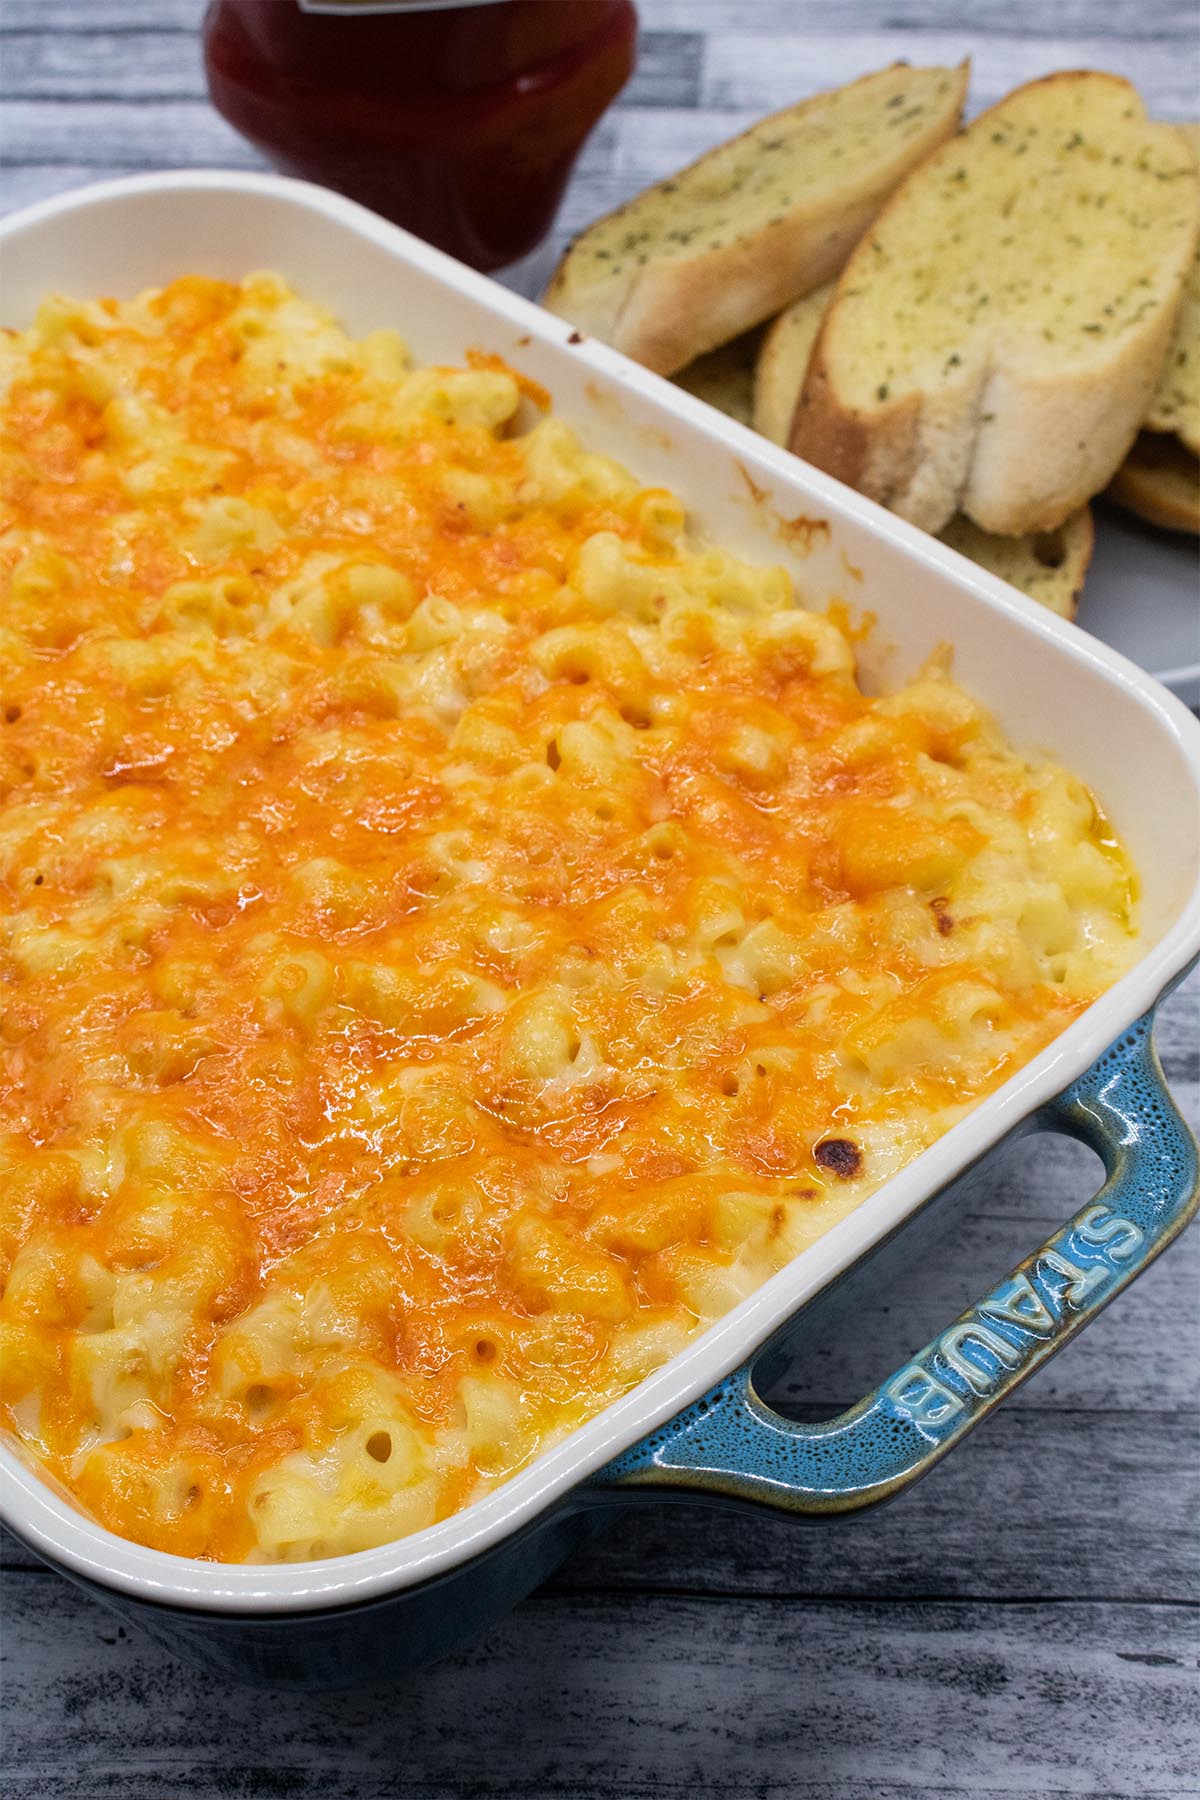 Macaroni cheese in rectangle dish next to garlic bread slices